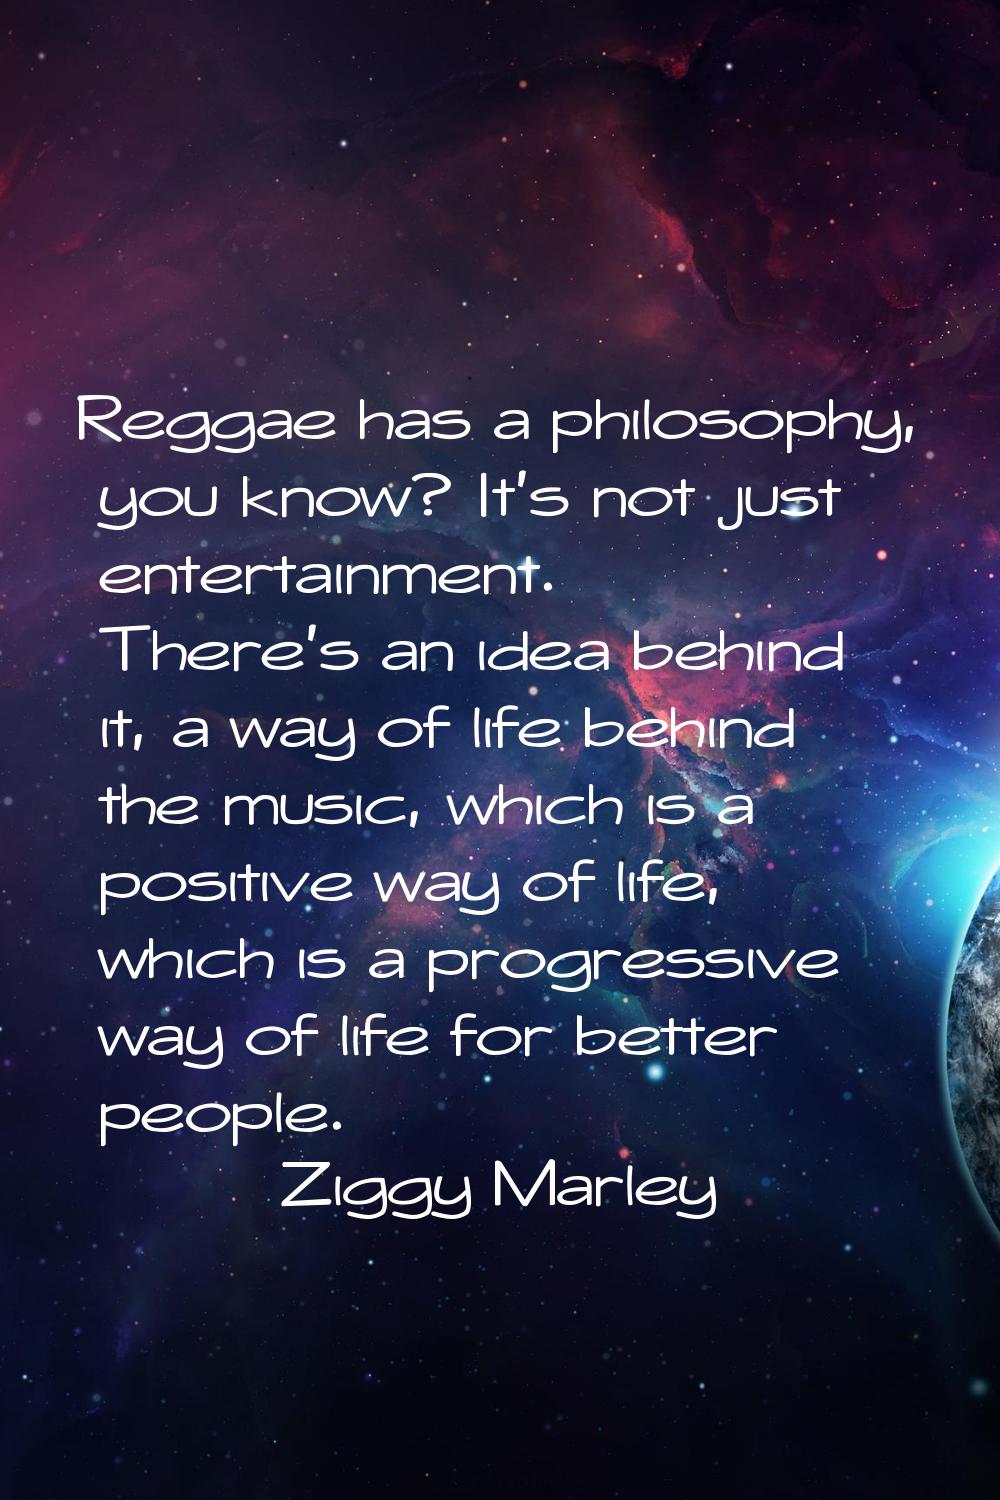 Reggae has a philosophy, you know? It's not just entertainment. There's an idea behind it, a way of